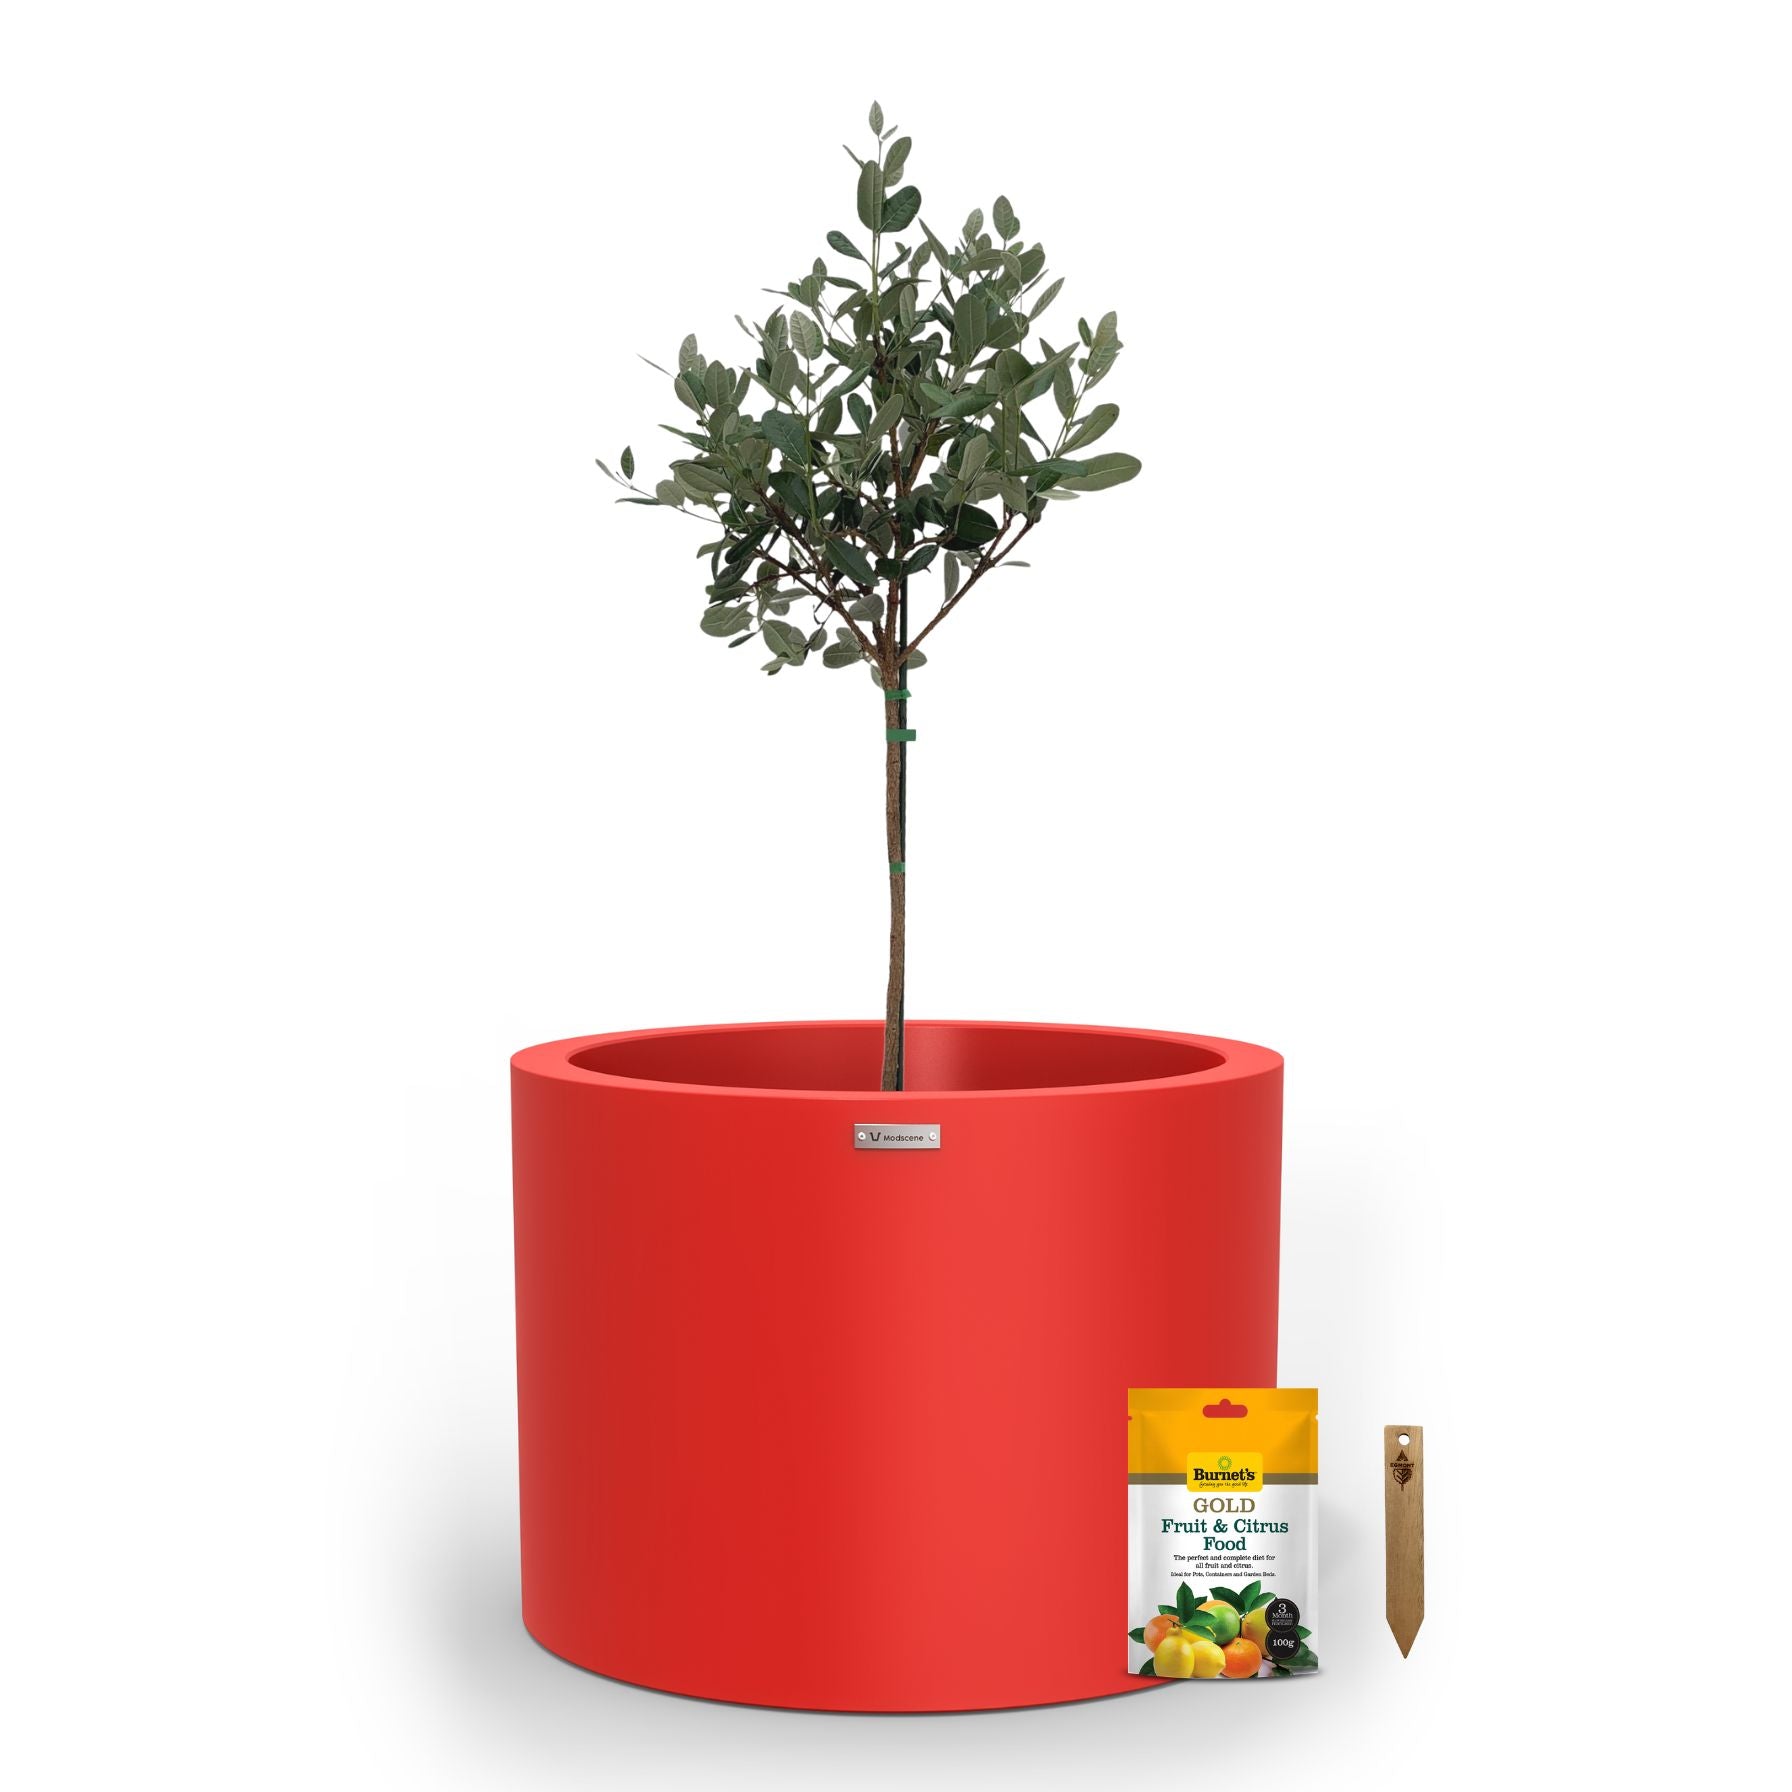 A large red planter pot used to plant fruit trees. 